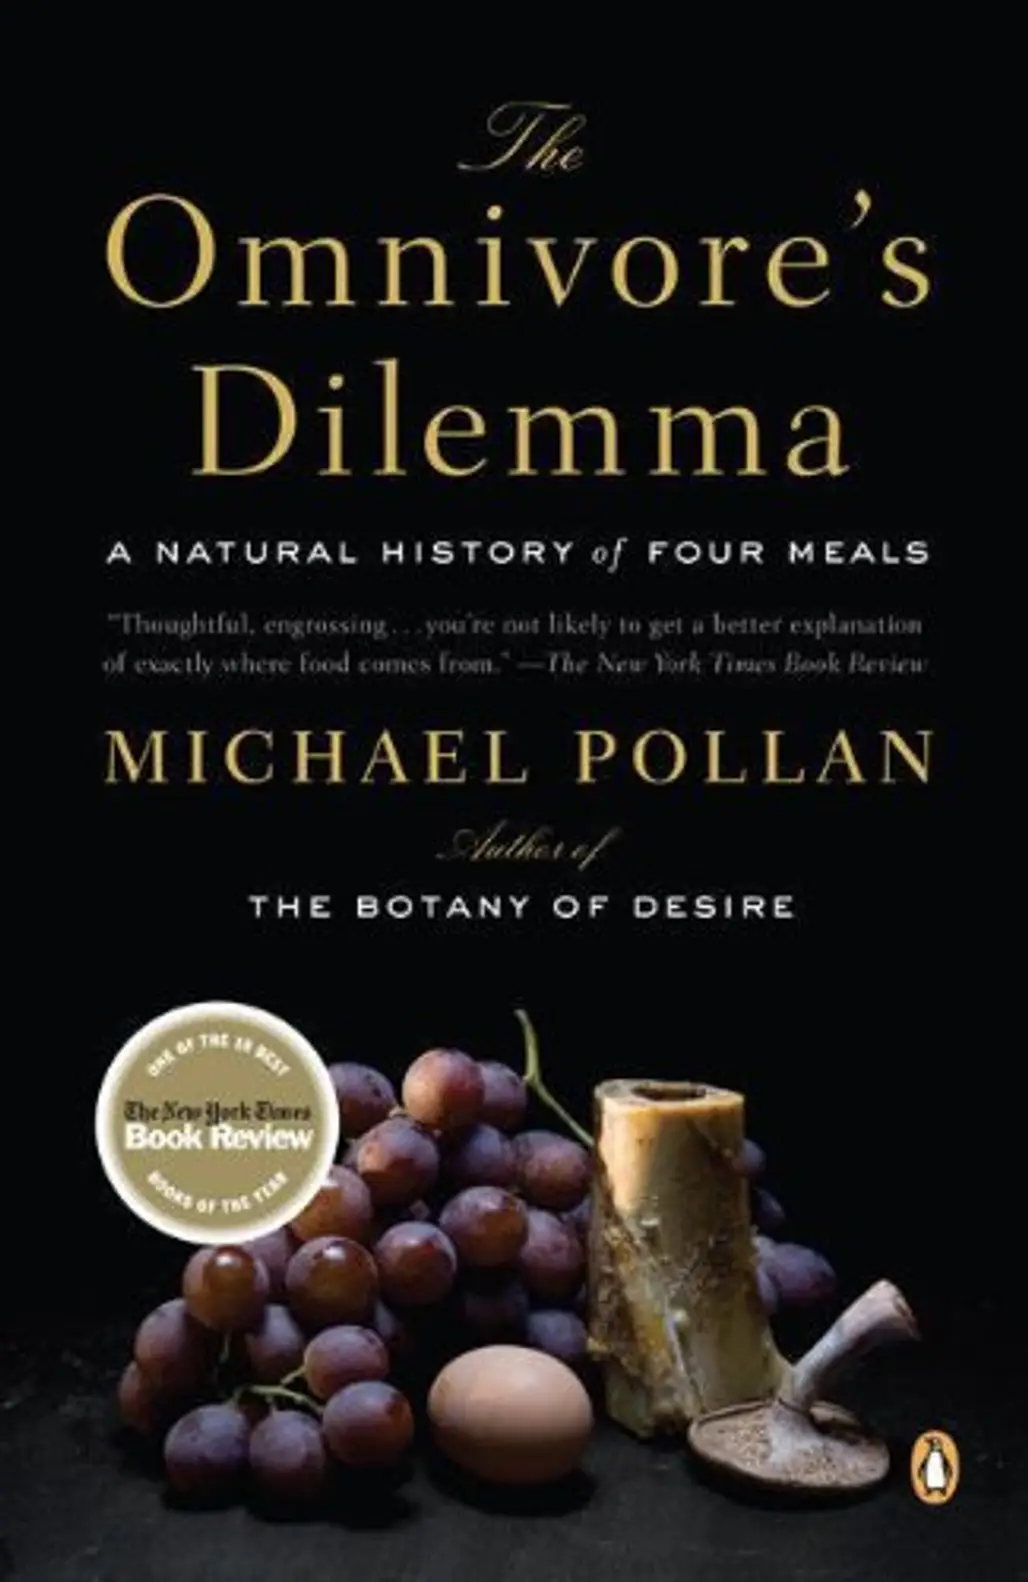 The Omnivore's Dilemma: a Natural History of Four Meals by Michael Pollan